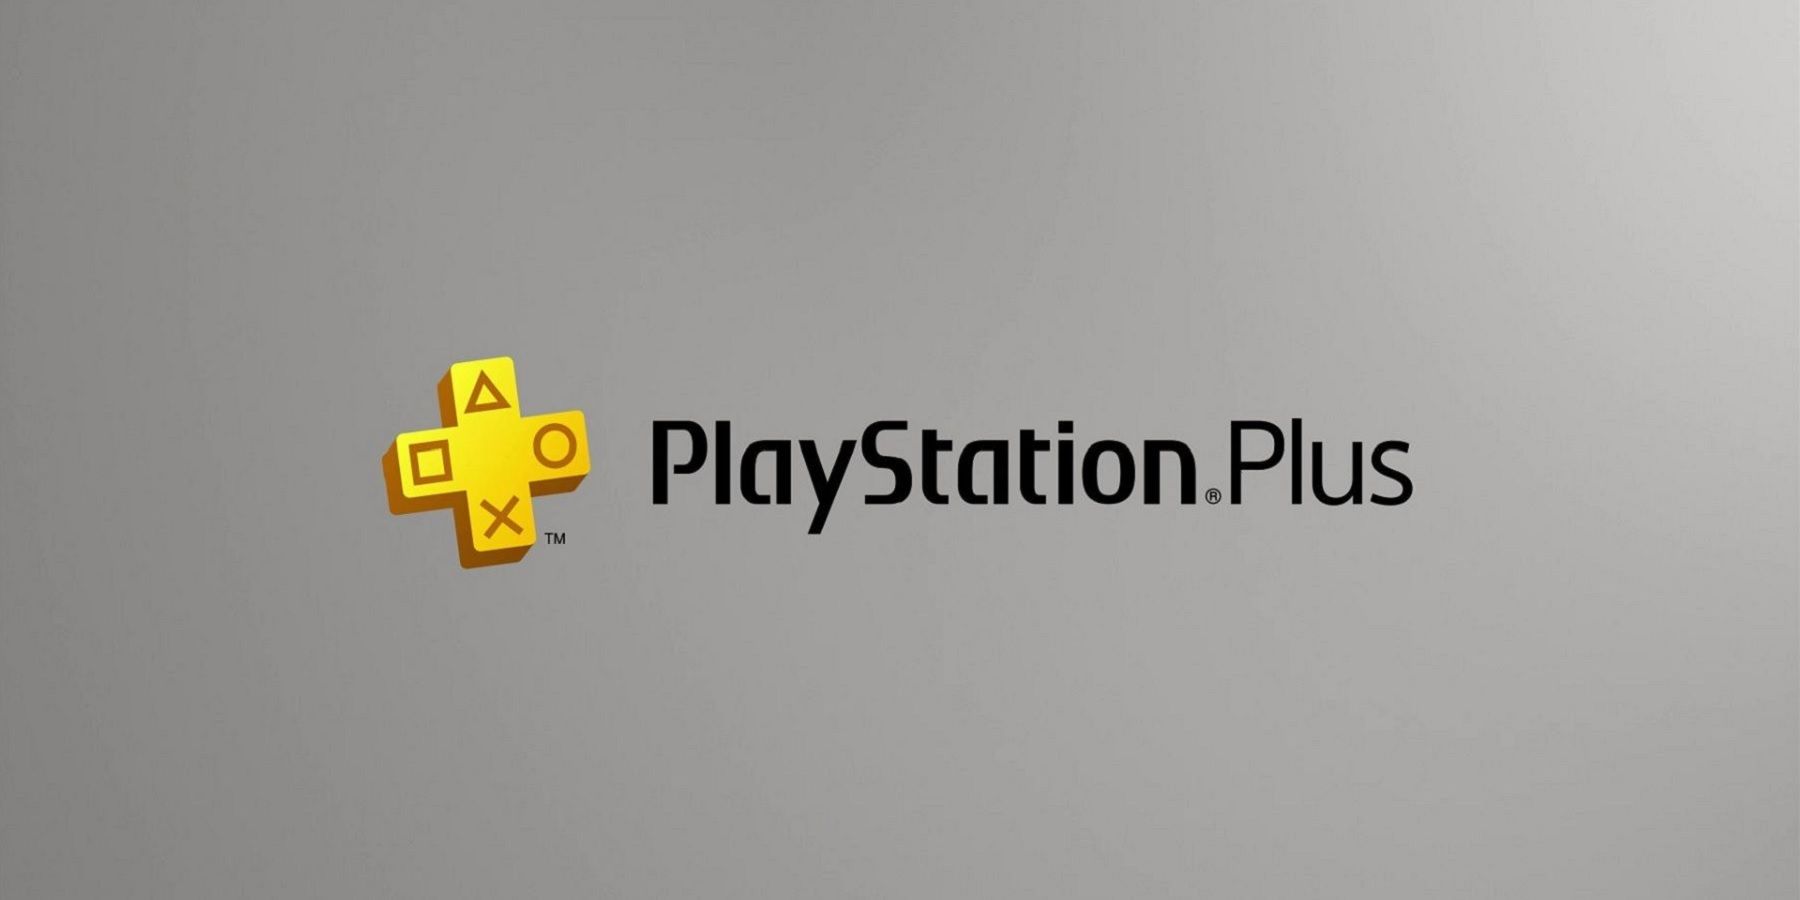 PSA: June 2021 PlayStation Plus Free Games Are Now Available